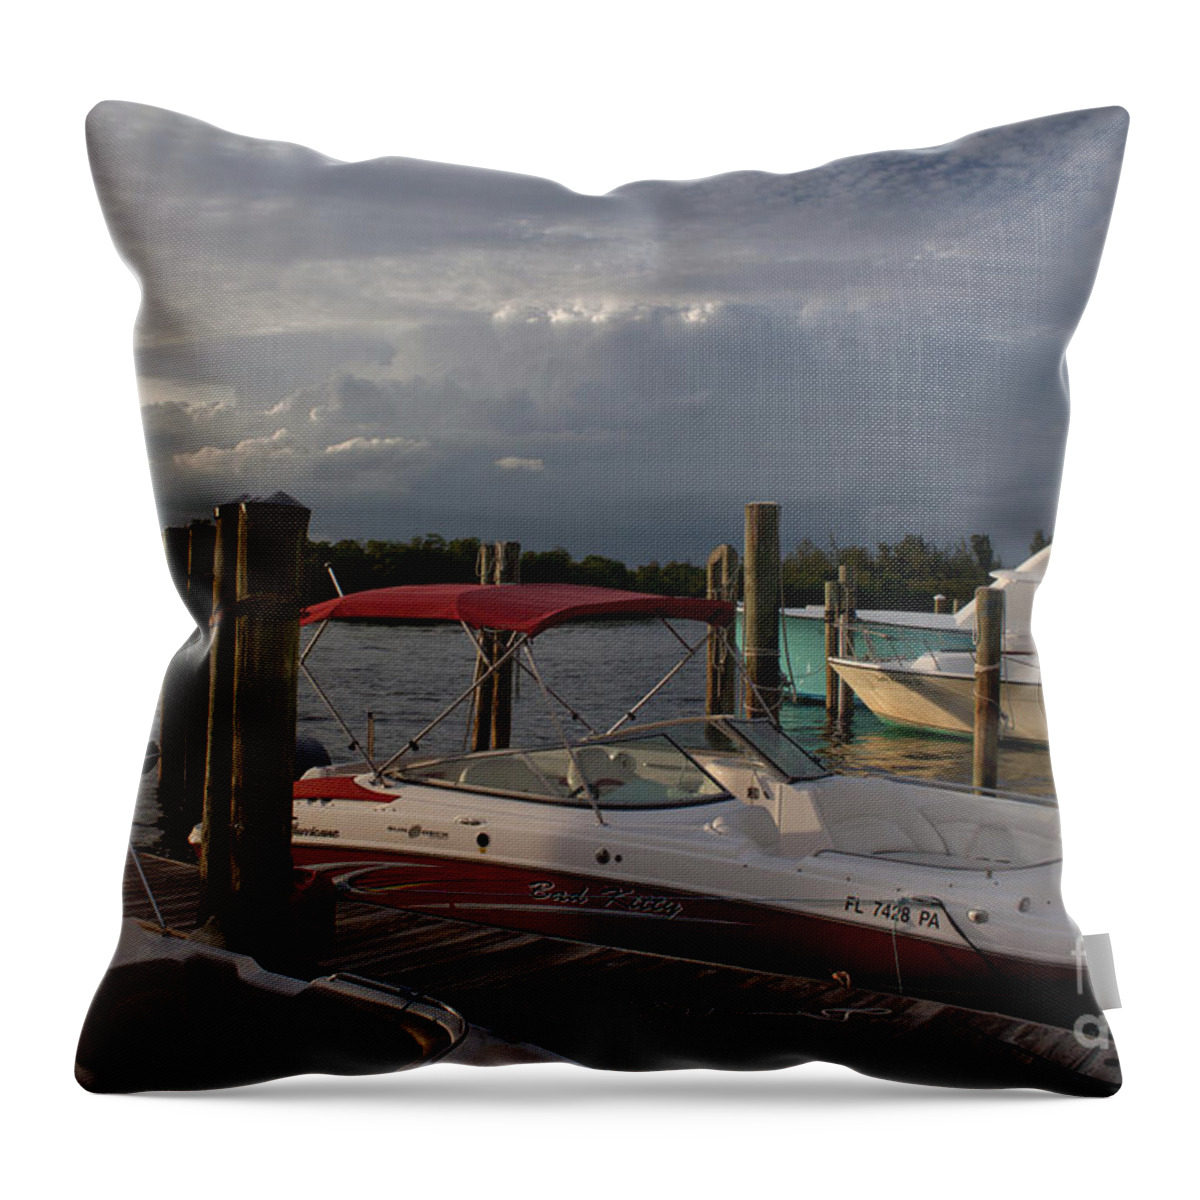 Boat Throw Pillow featuring the photograph Bad Kitty by Ivete Basso Photography